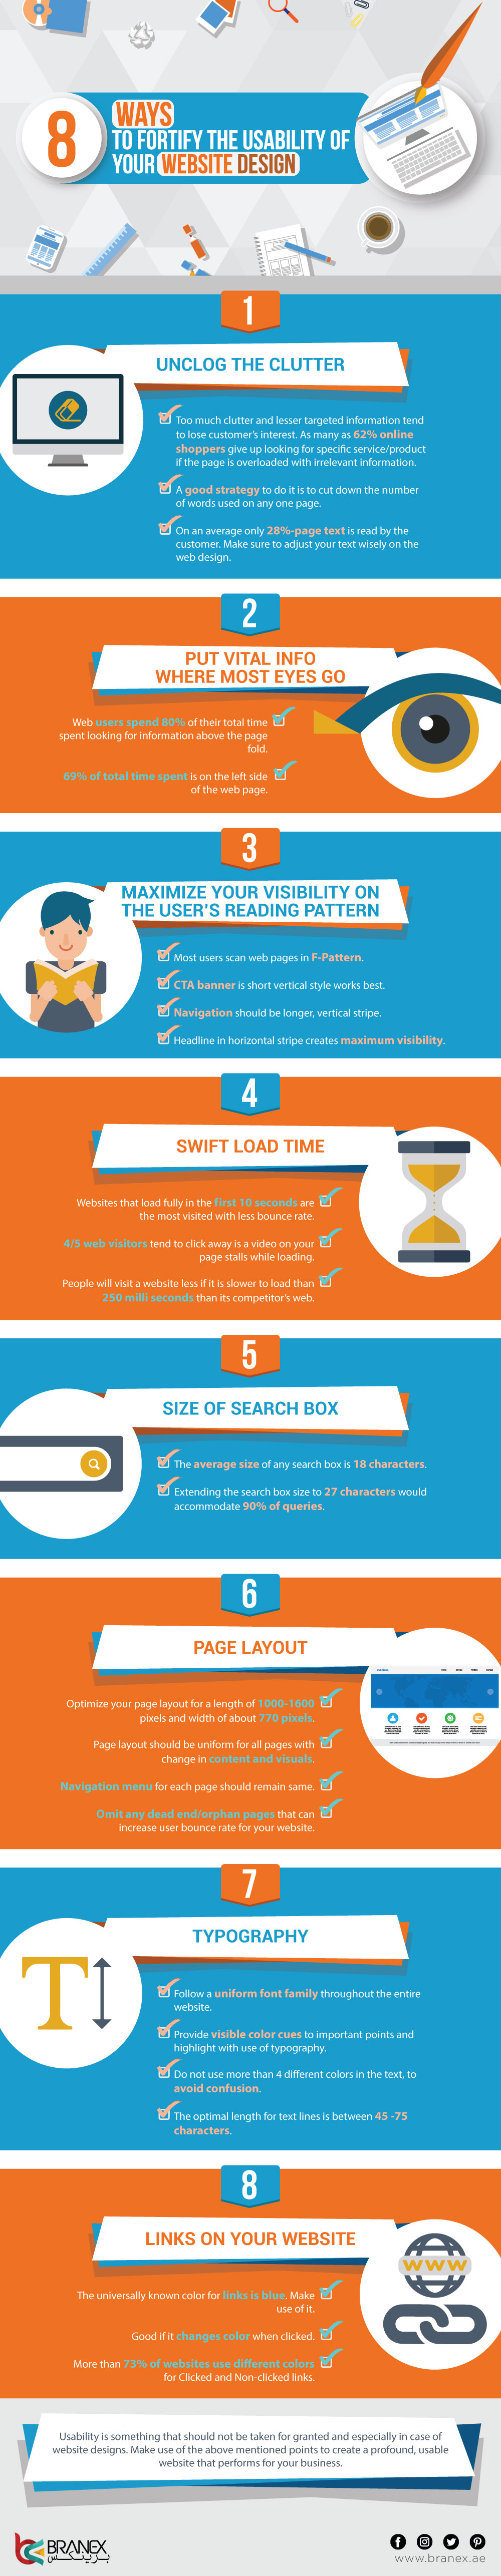 8-Ways-to-Fortify-the-Usability-of-your-Website-Design-Infographics